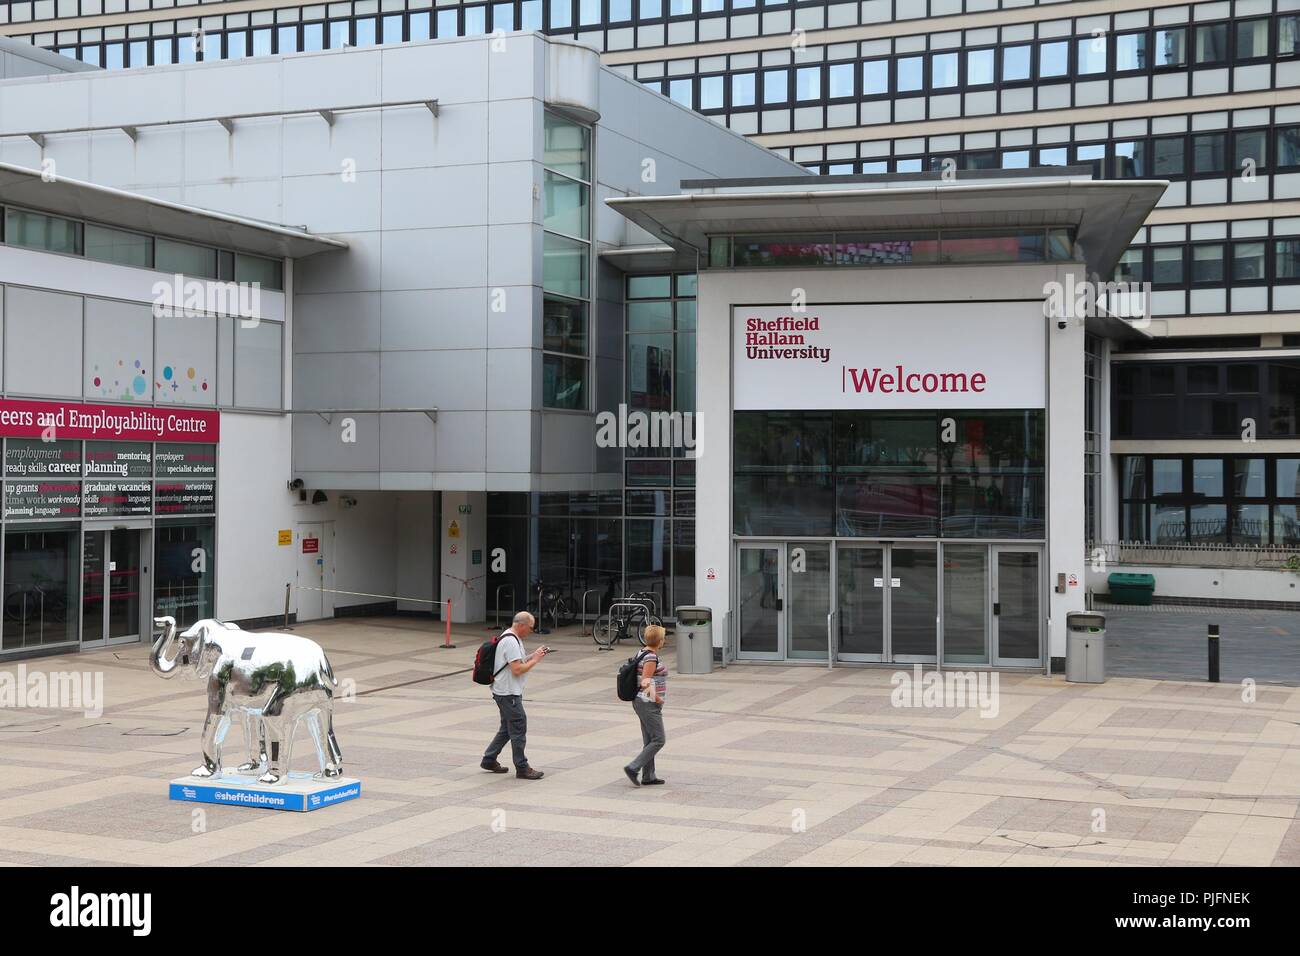 SHEFFIELD, UK - JULY 10, 2016: People visit Sheffield Hallam University in the UK. The public university is 6th largest in the UK with 31,530 students Stock Photo